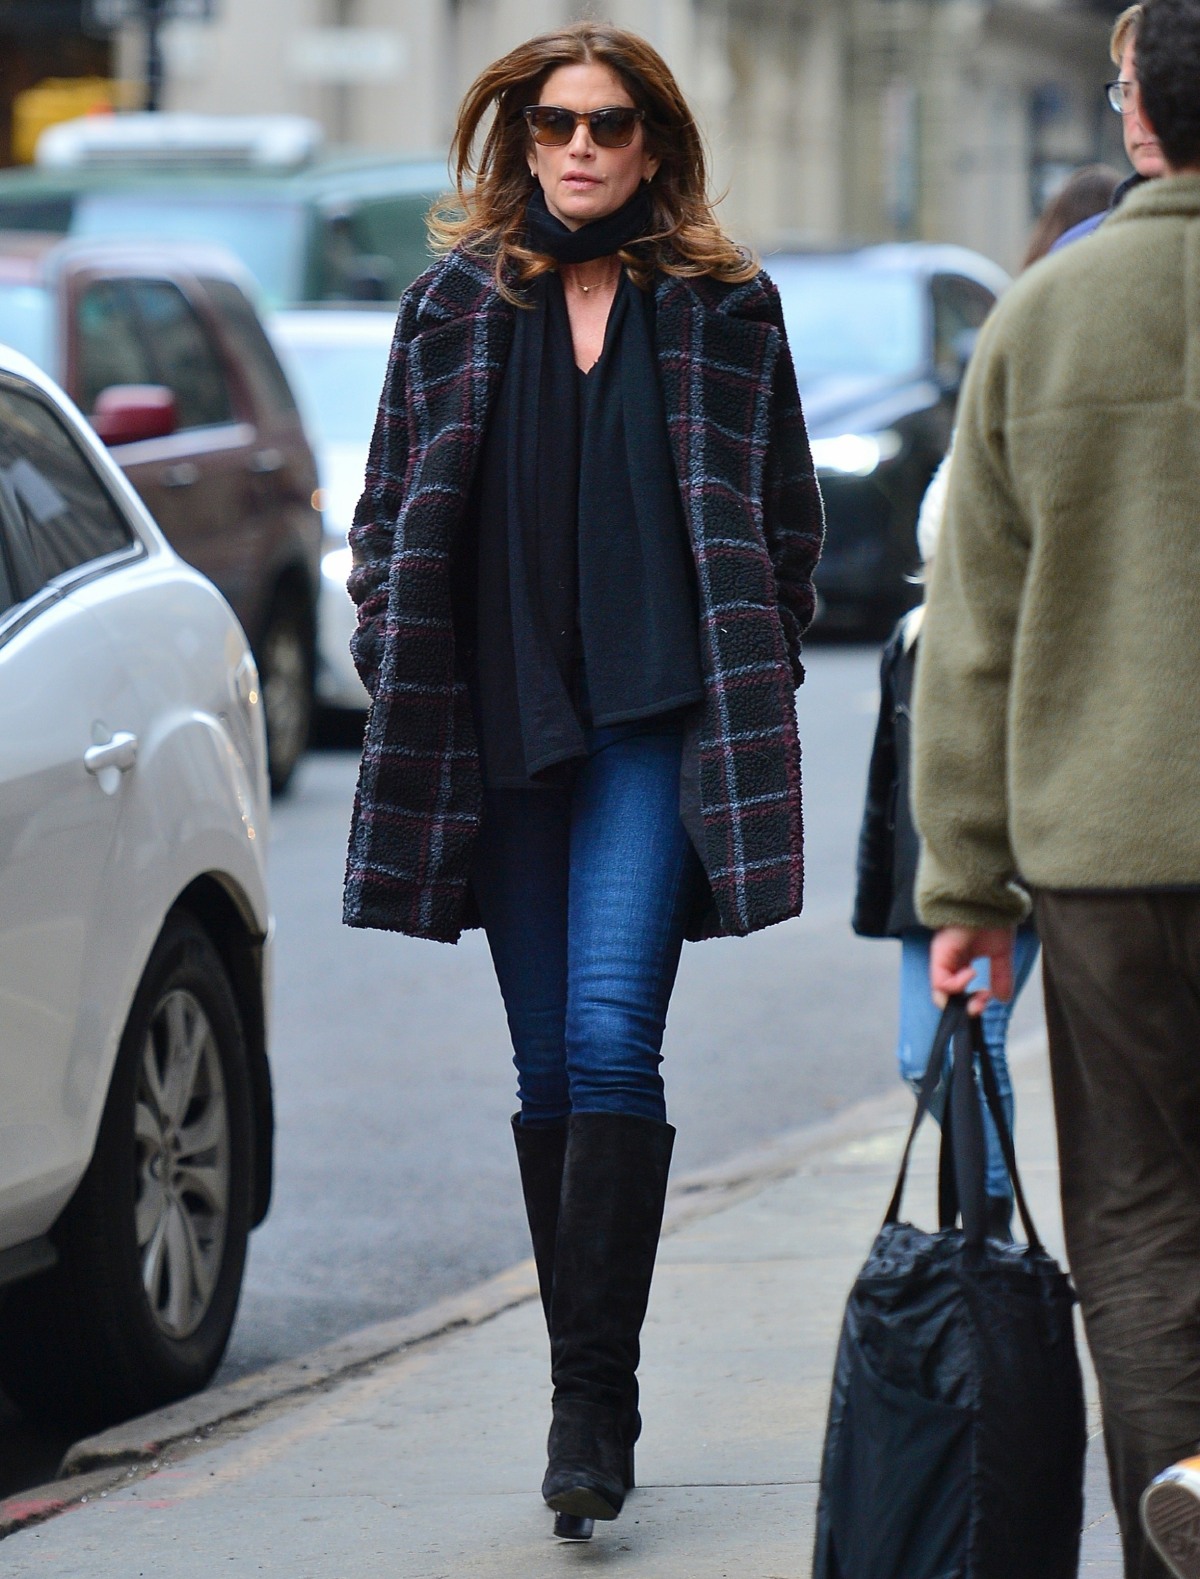 Cindy Crawford leaves her daughter Kaia's apartment in stylish plaid coat